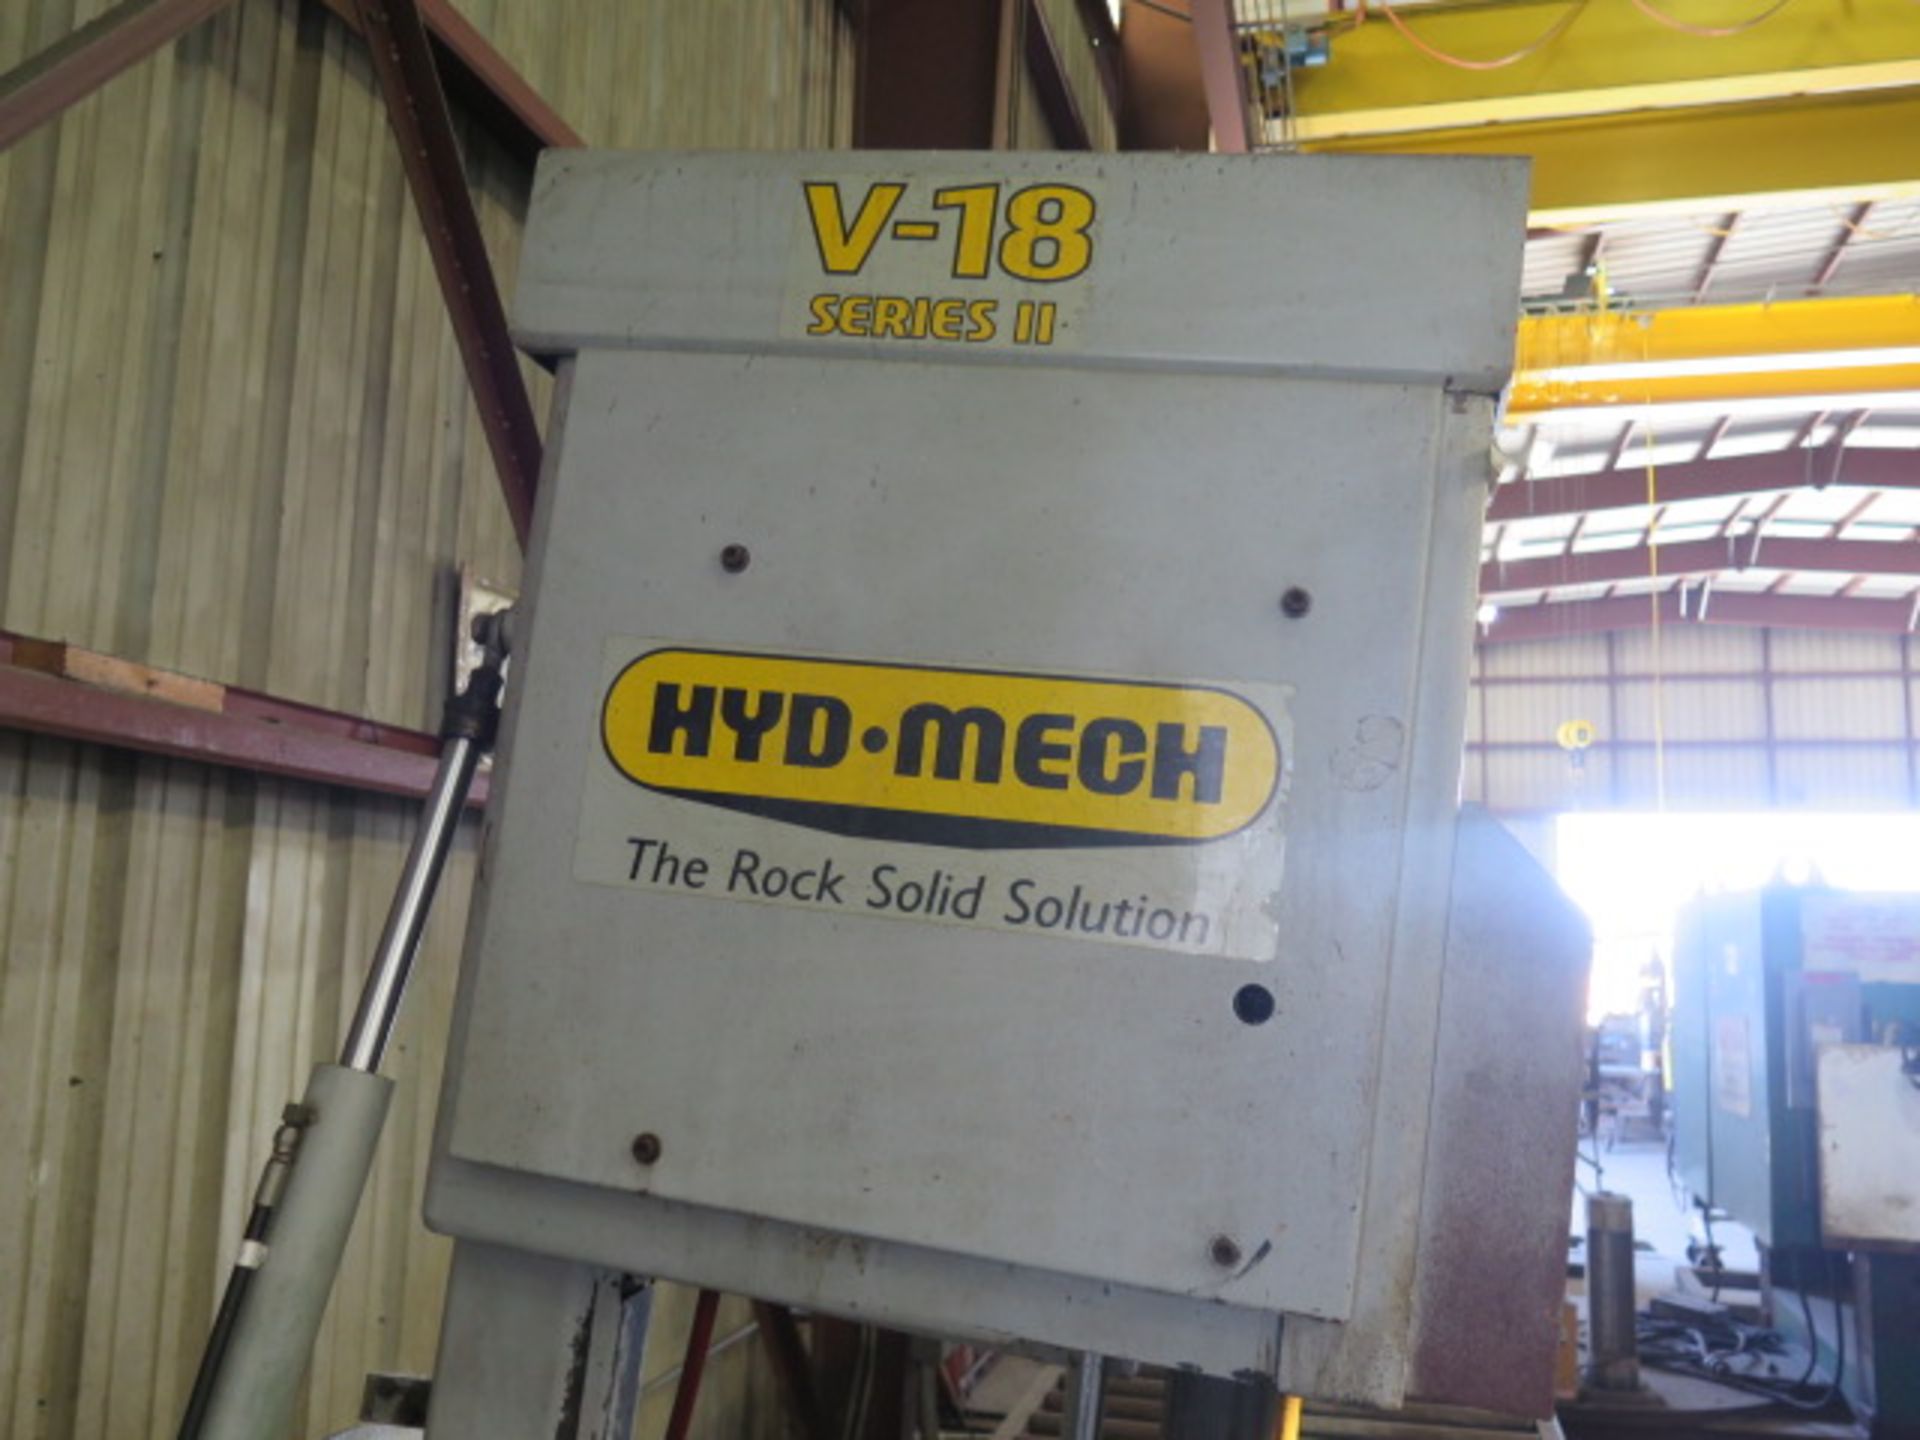 Hyd-Mech V-18 18” Vertical Miter Band Saw s/n J0701940 w/ Hyd-Mech Controls, Hydraulic, SOLD AS IS - Image 17 of 18